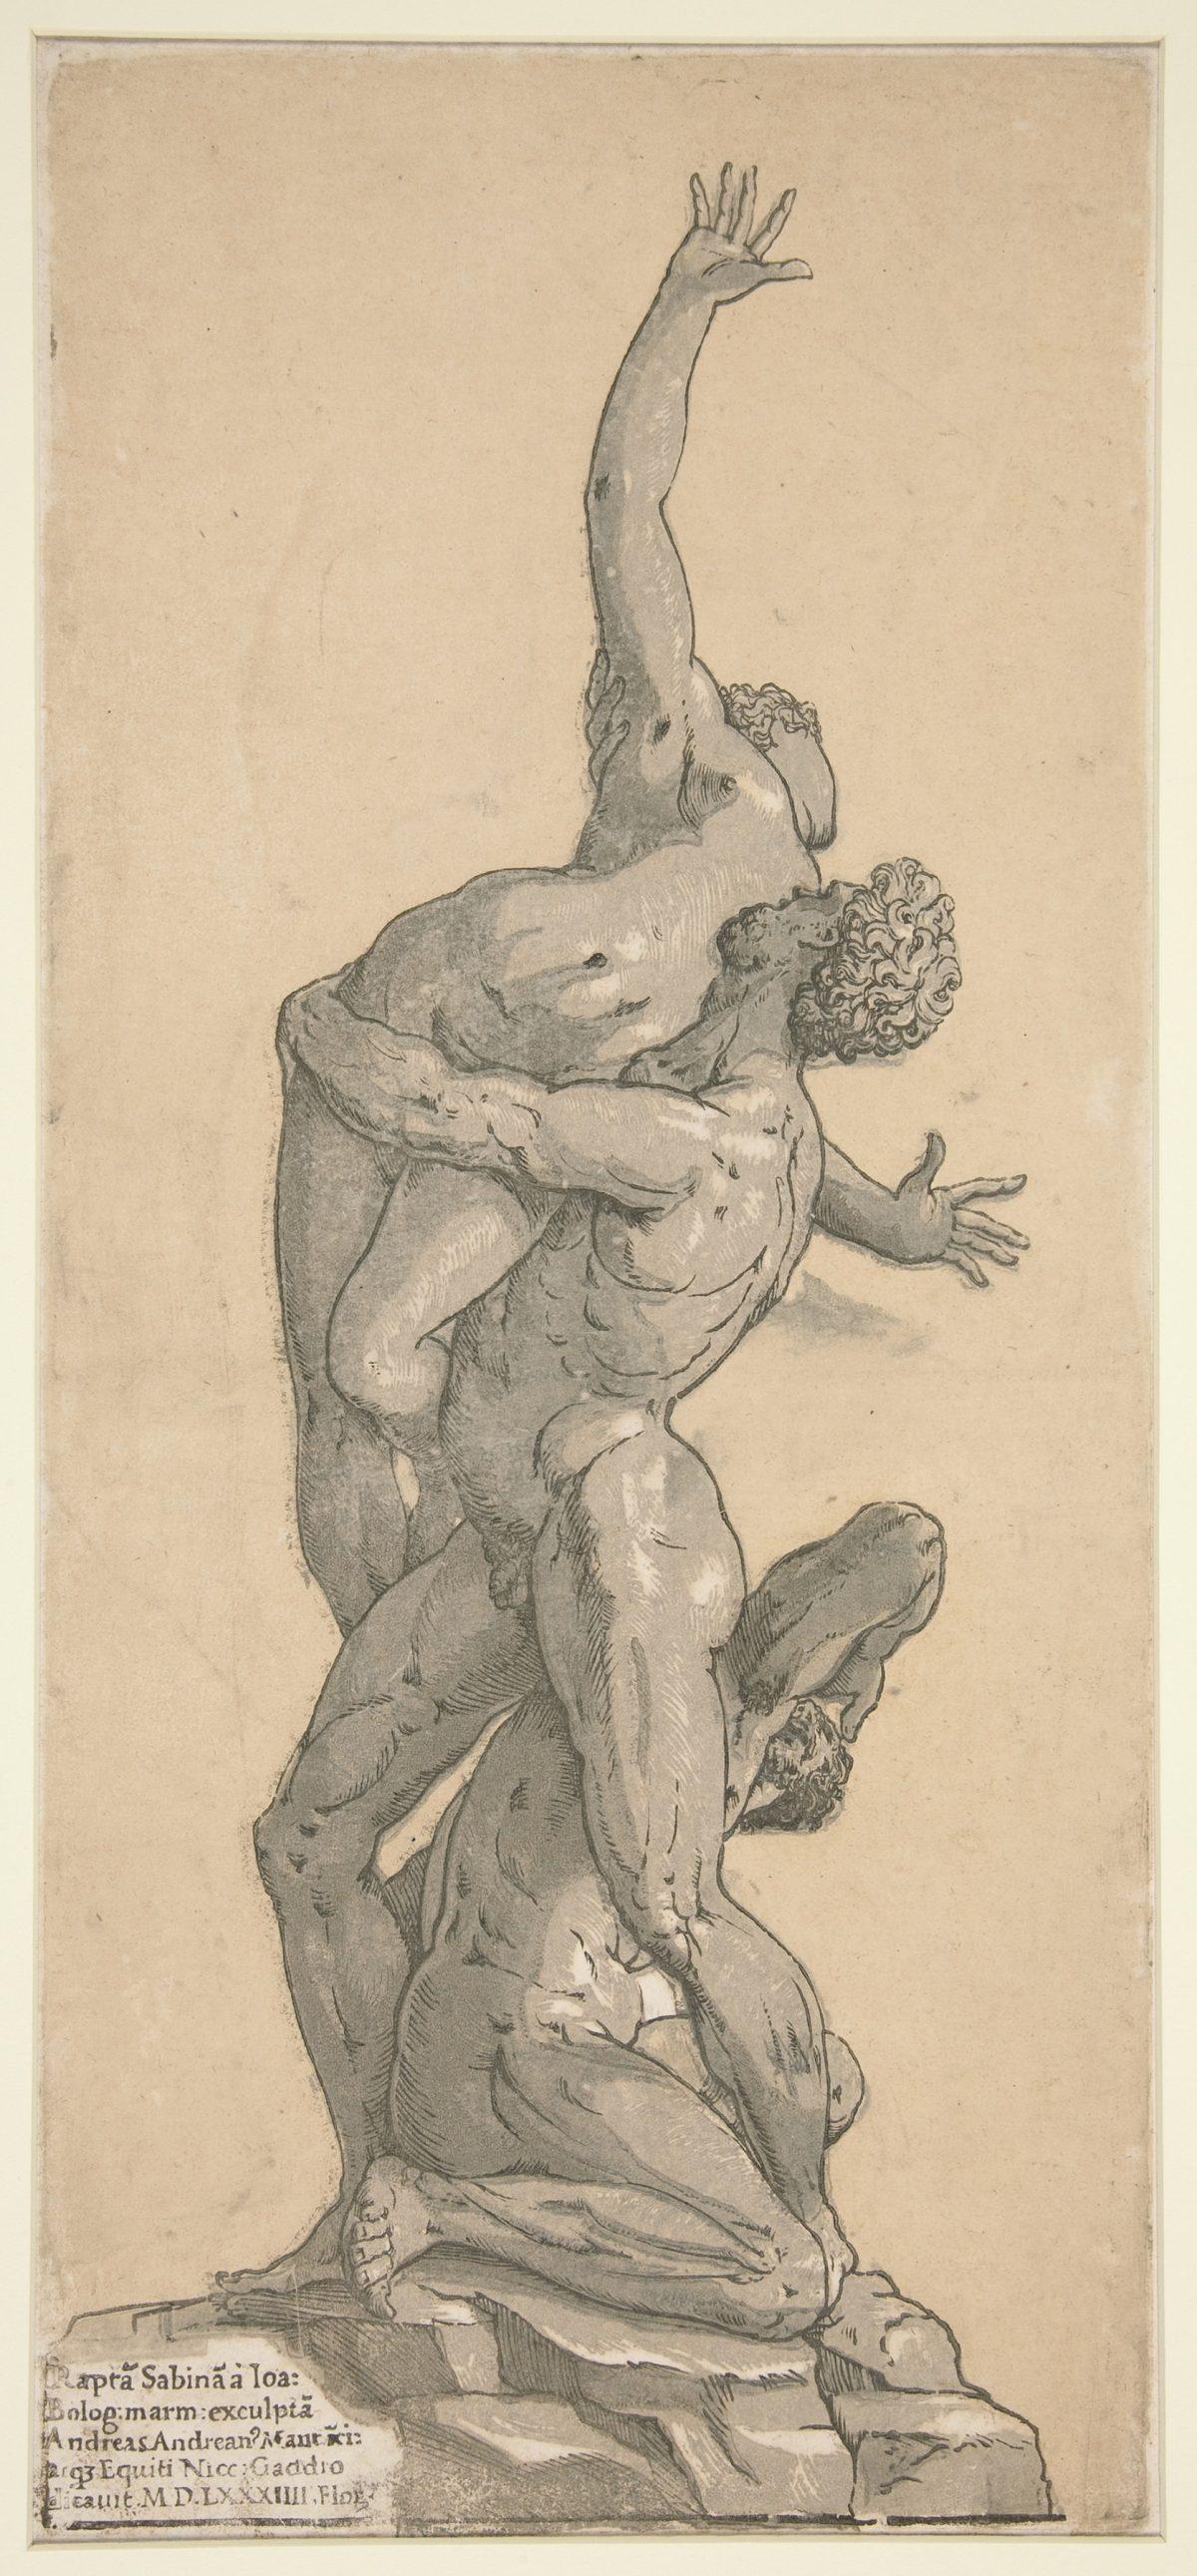 "Rape of a Sabine," 1584, by Andrea Andreani, after Giambologna's sculpture. Chiaroscuro woodcut from five blocks in yellow, light gray, medium gray, dark gray, and black, state ii/ii (?), 18 1/4 inches by 8 5/16 inches. Bequest of Lydia Evans Tunnard. (Yale University Art Gallery)